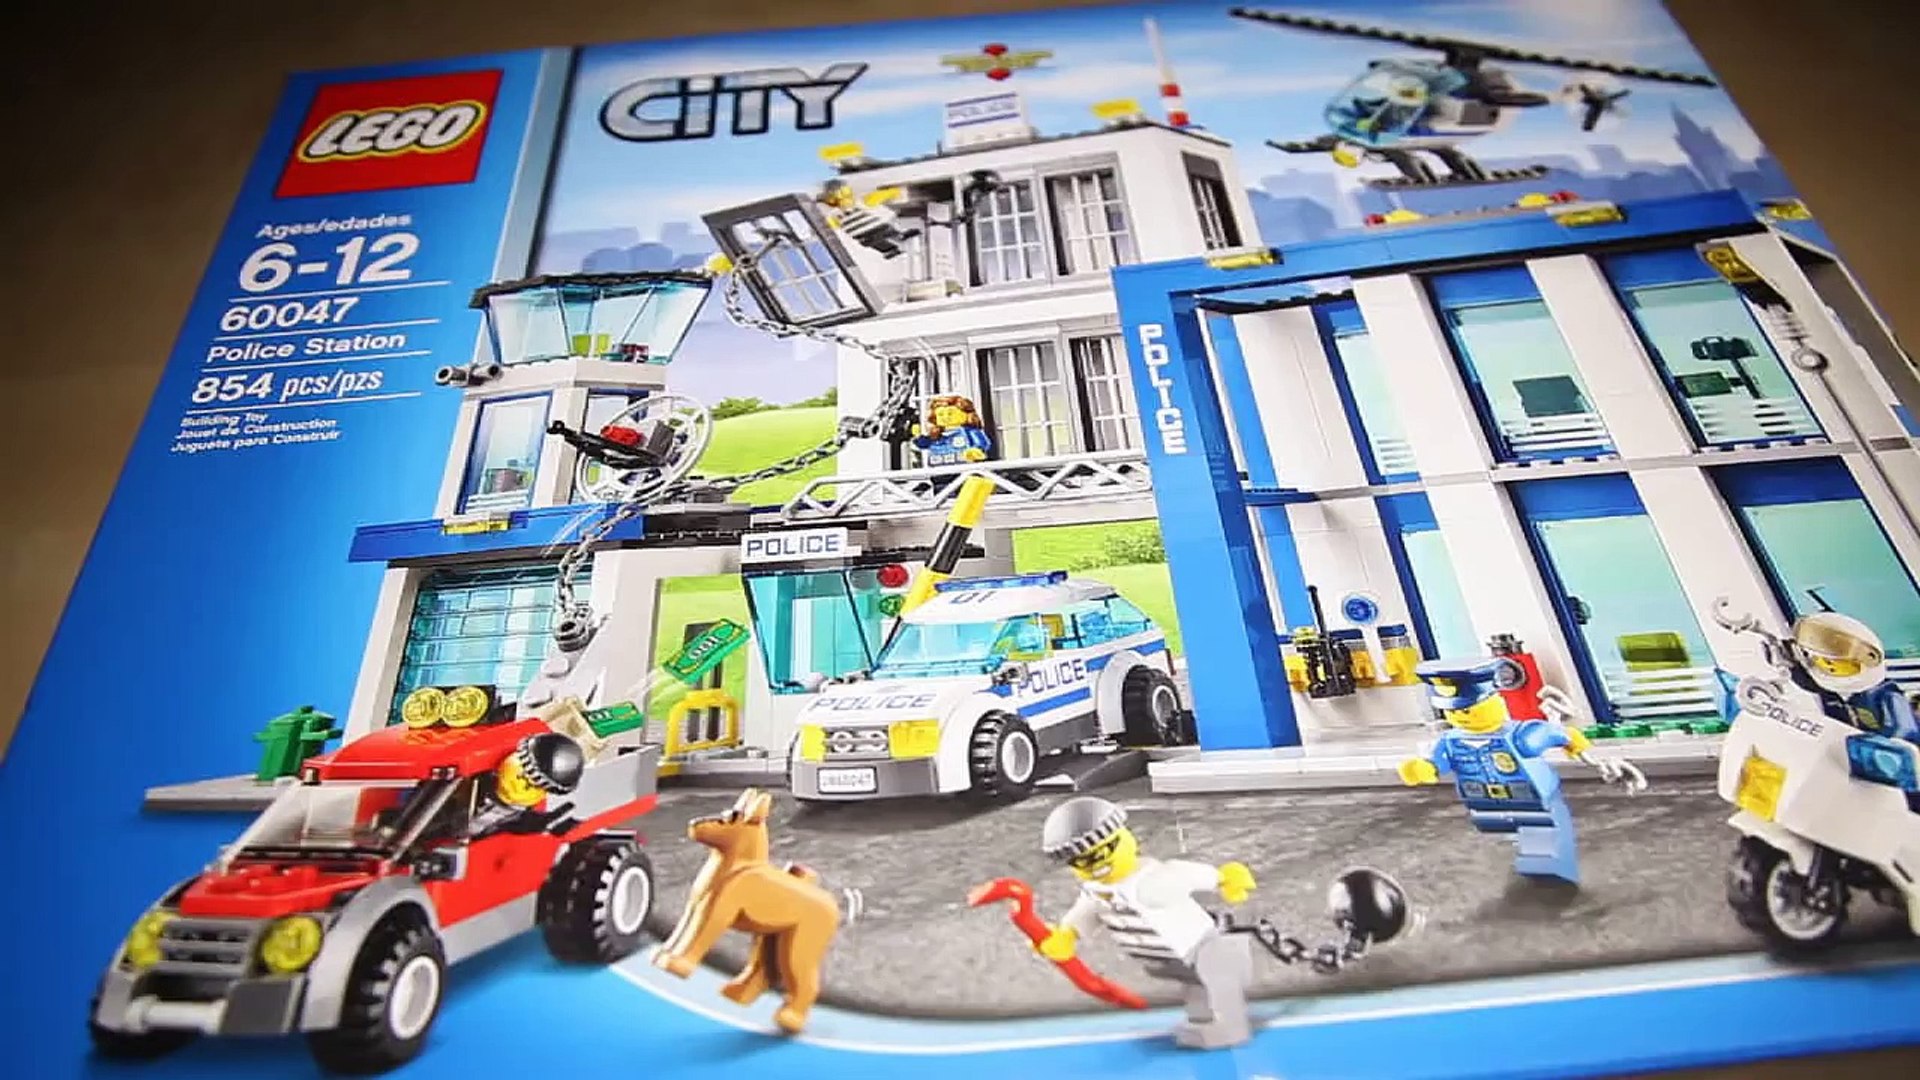 Lego City 60047 Police Station - Lego Speed Build Review - video Dailymotion